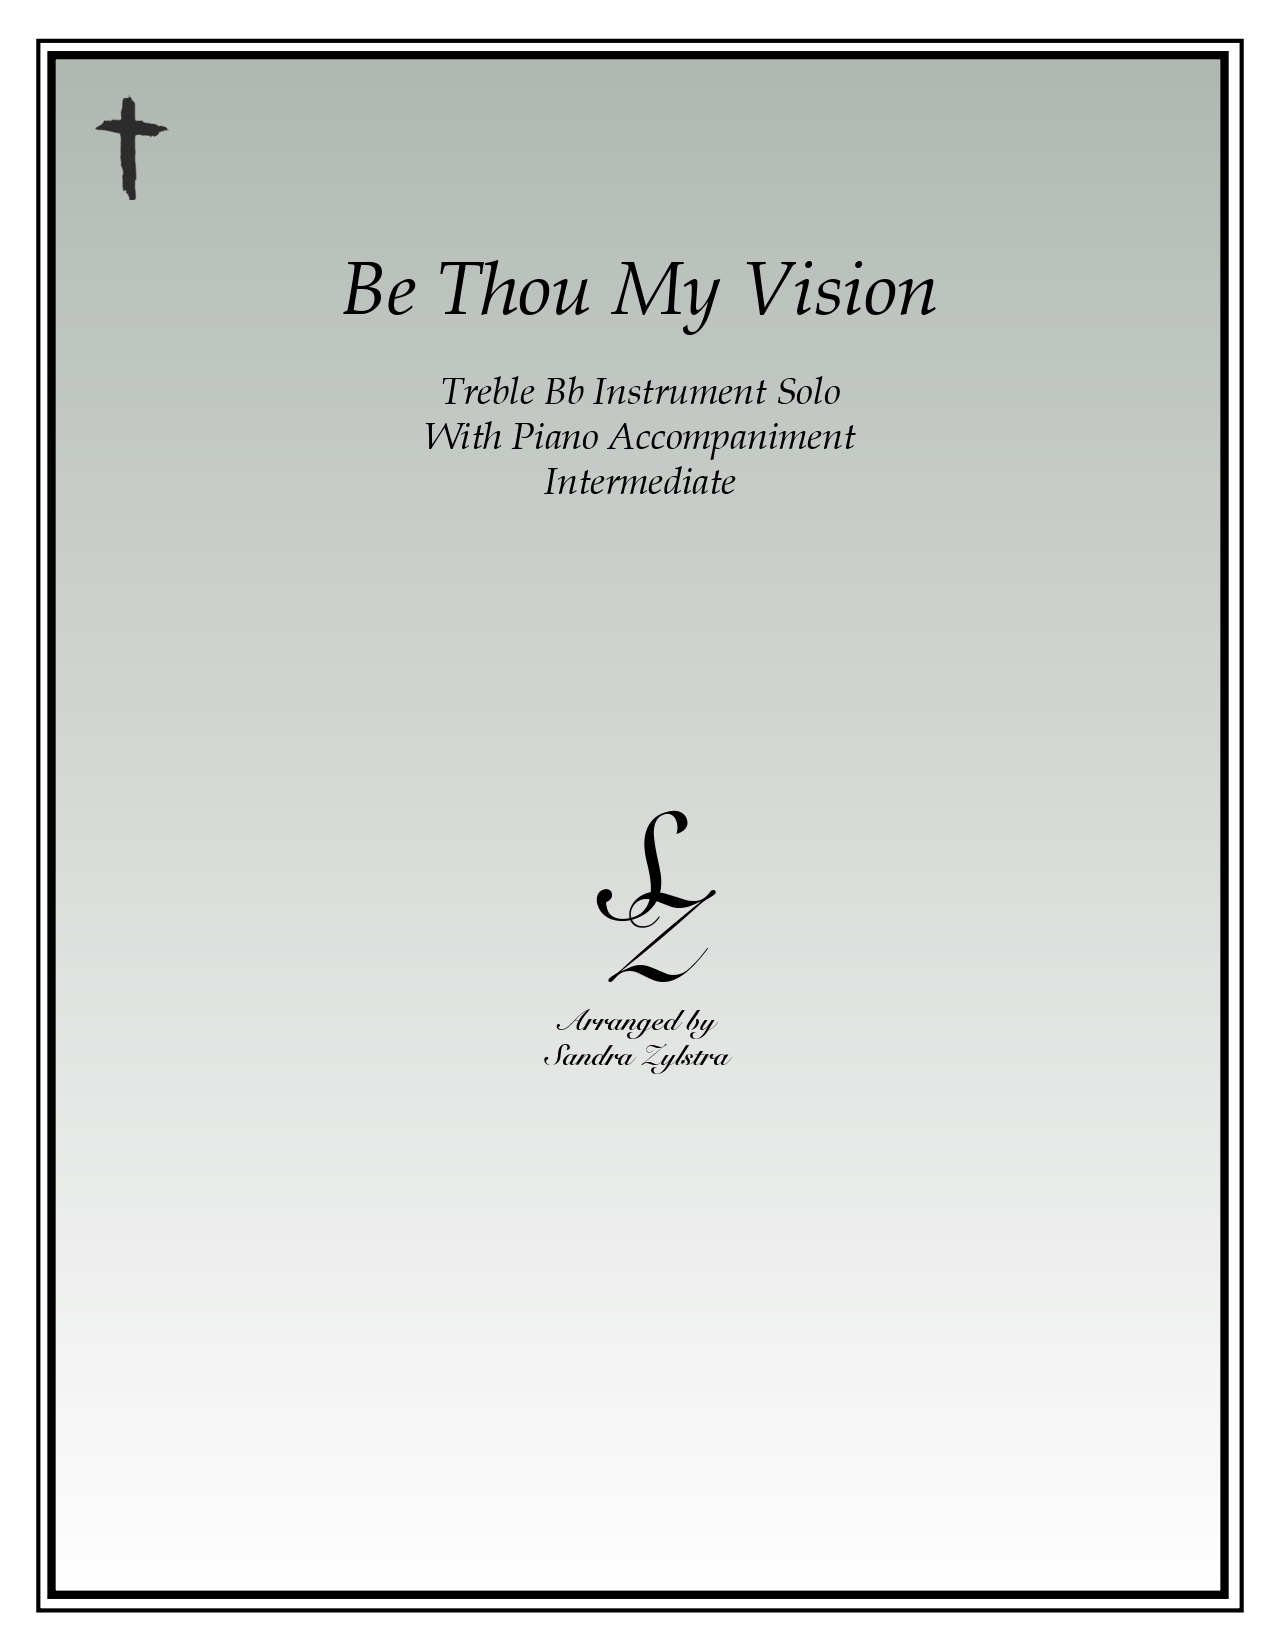 Be Thou My Vision Bb instrument solo part cover page 00011